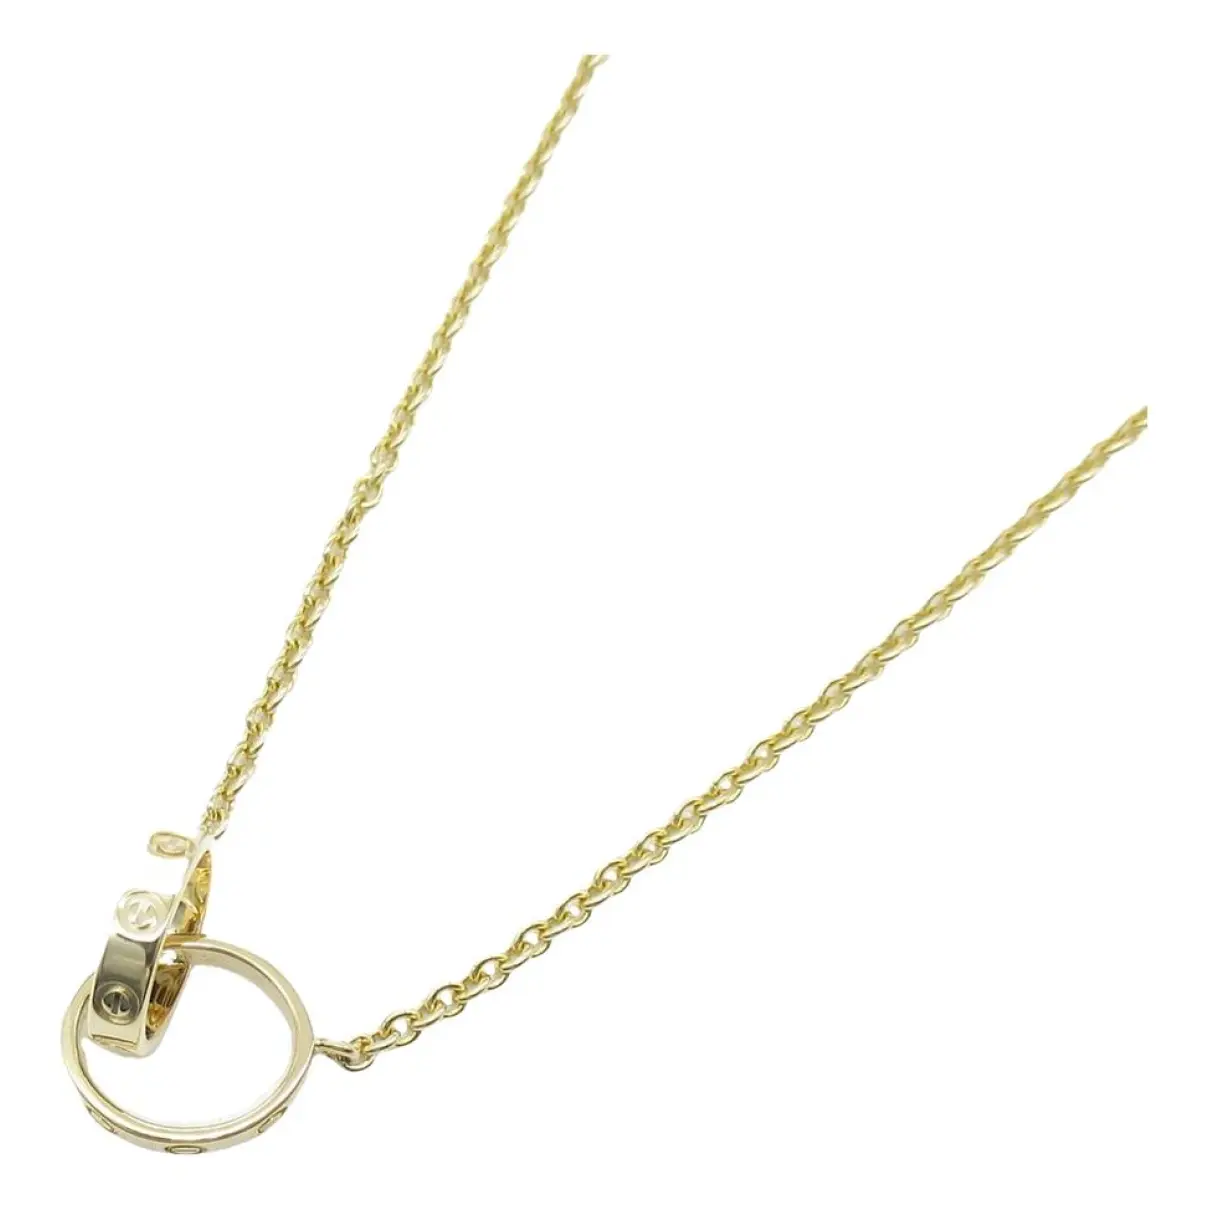 C yellow gold necklace